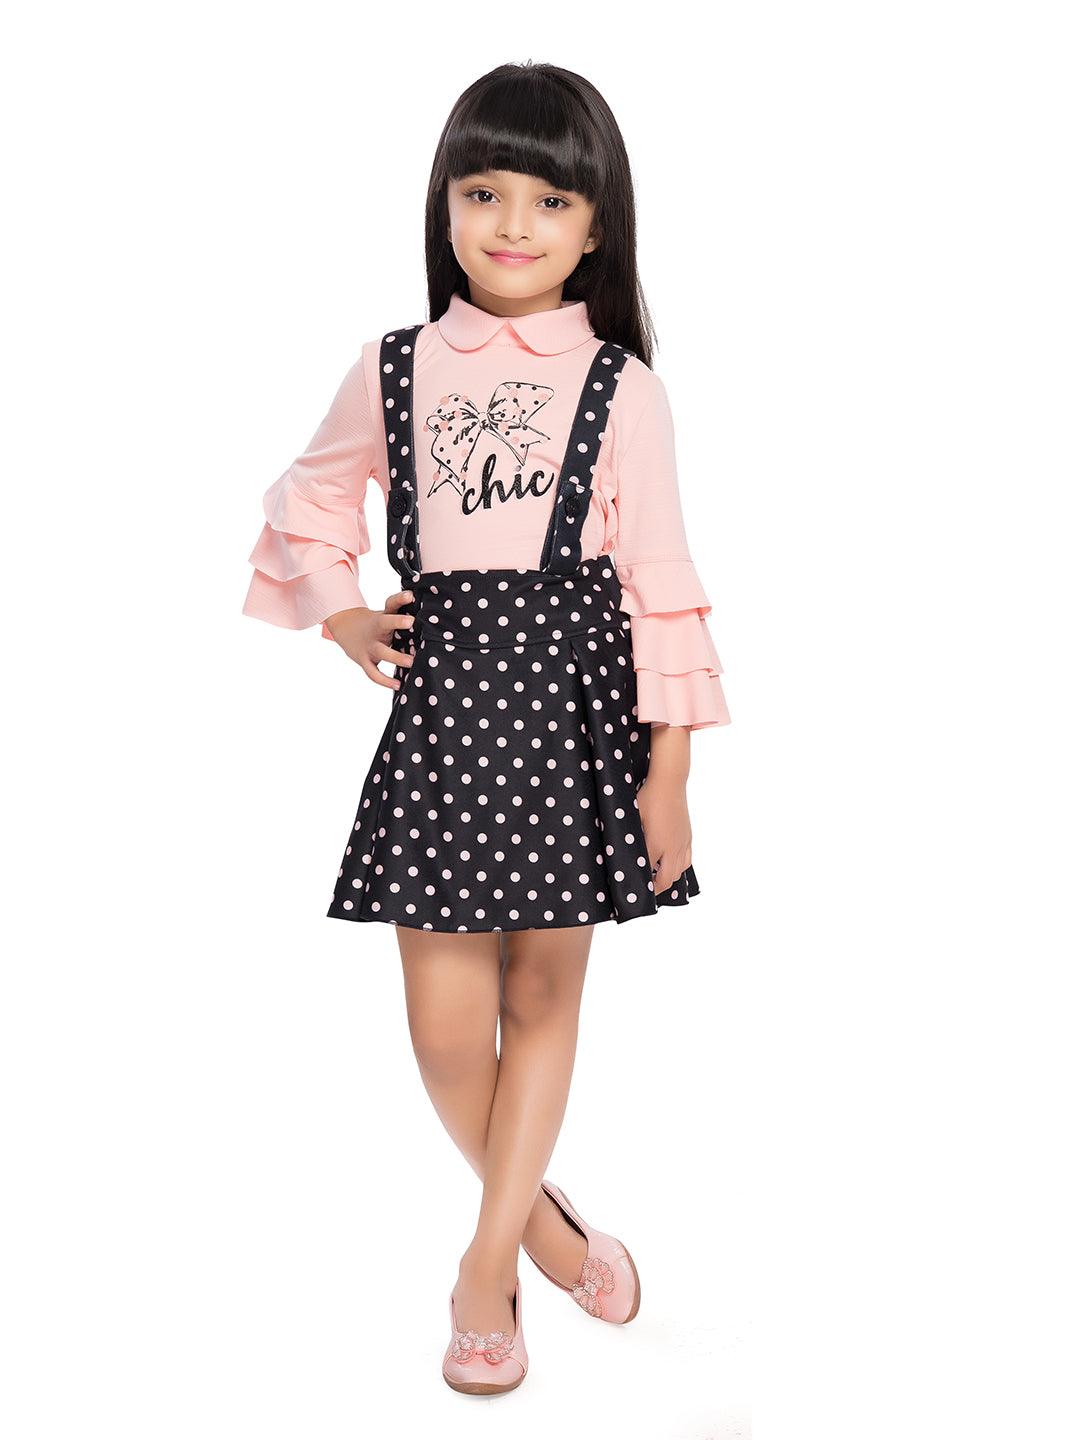 Peach Coloured Skirt Top Set - 2036 Peach - TINY BABY INDIA shop.tinybaby.in